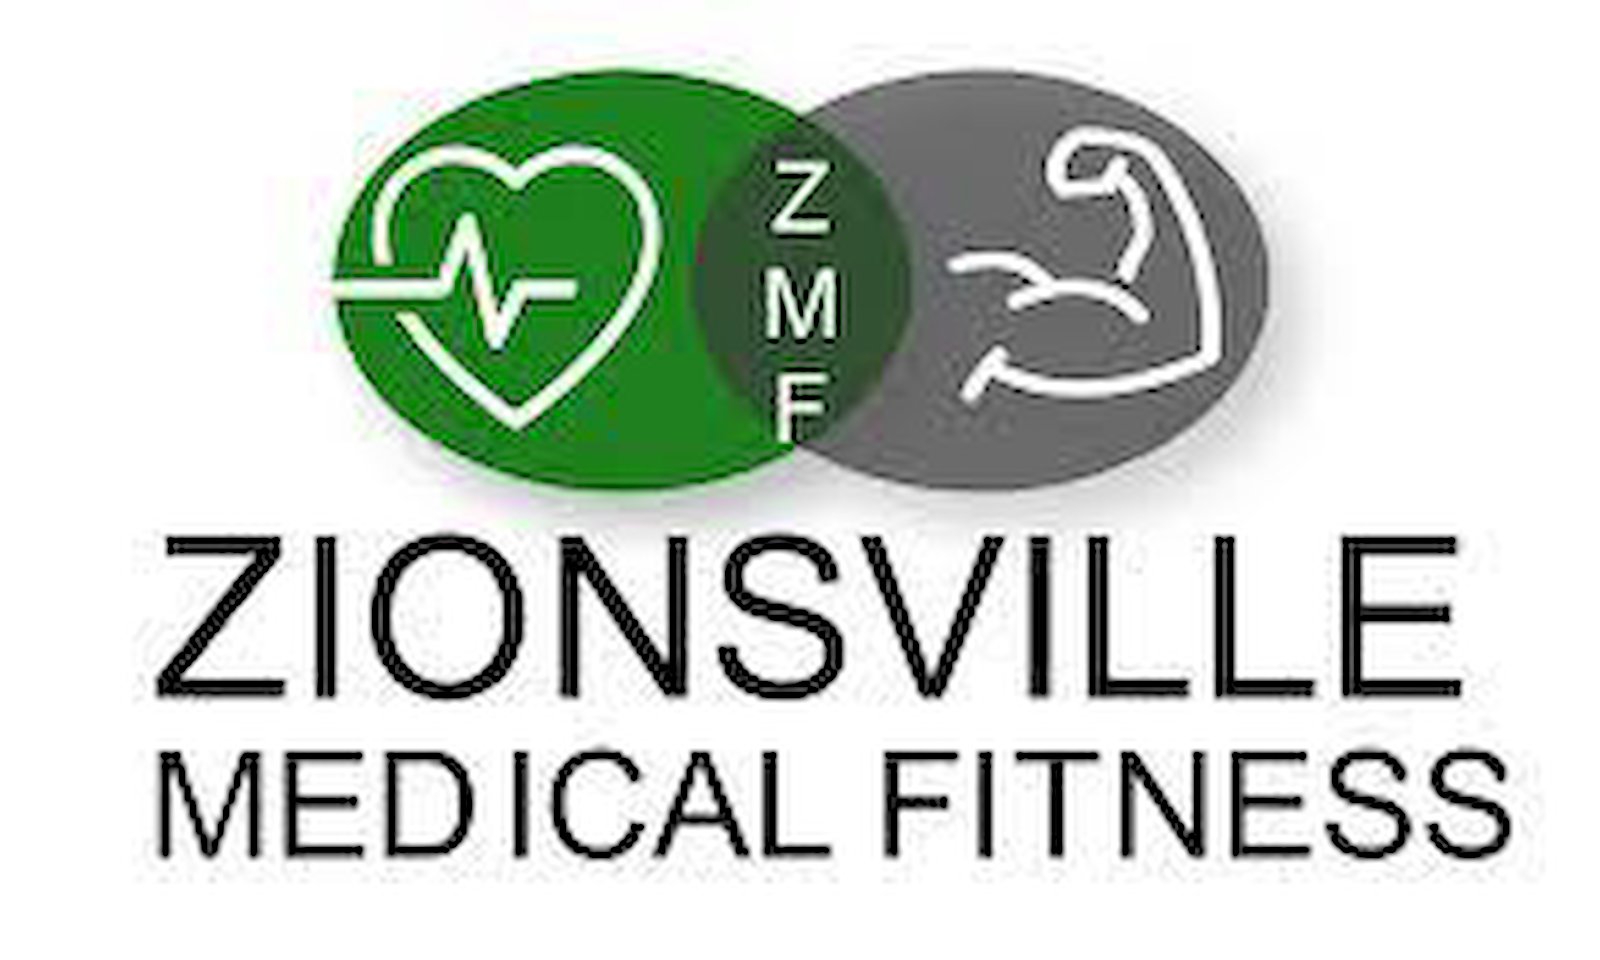 Zionsville Medical Fitness